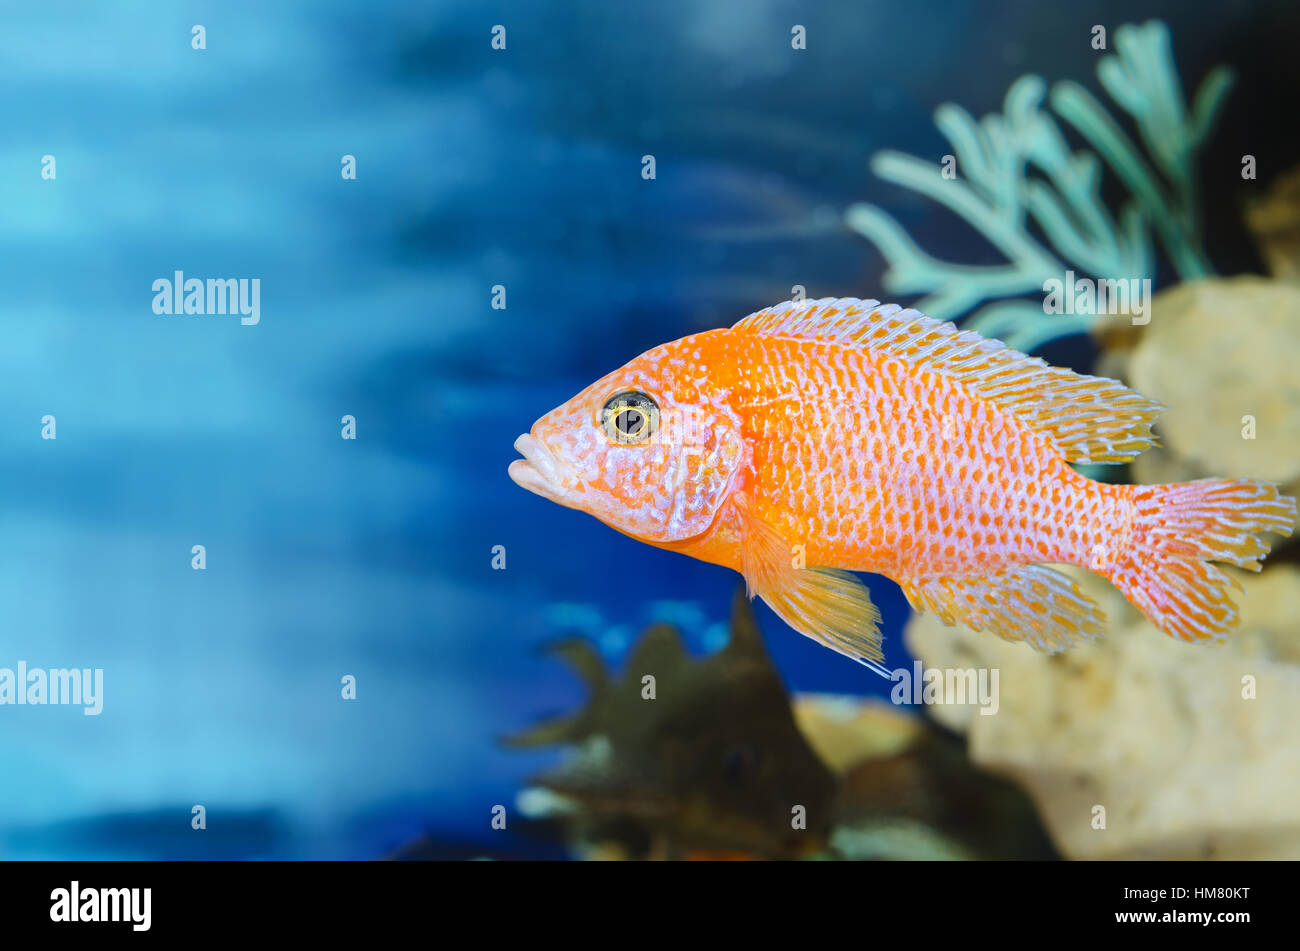 Aquarium blue background with red fish. Plenty of space for text. Stock Photo